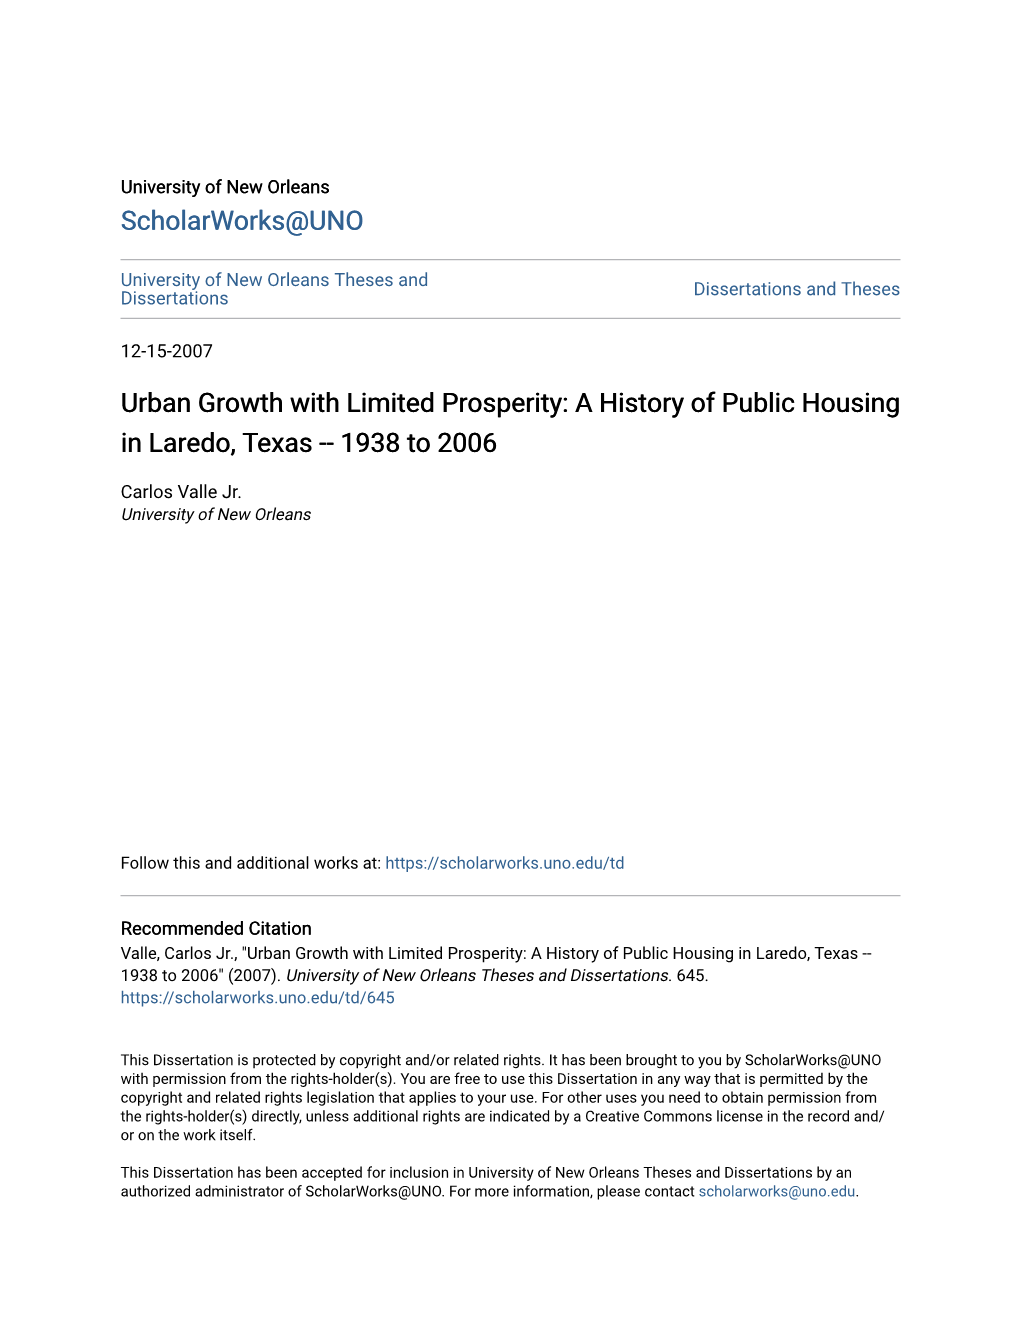 A History of Public Housing in Laredo, Texas -- 1938 to 2006